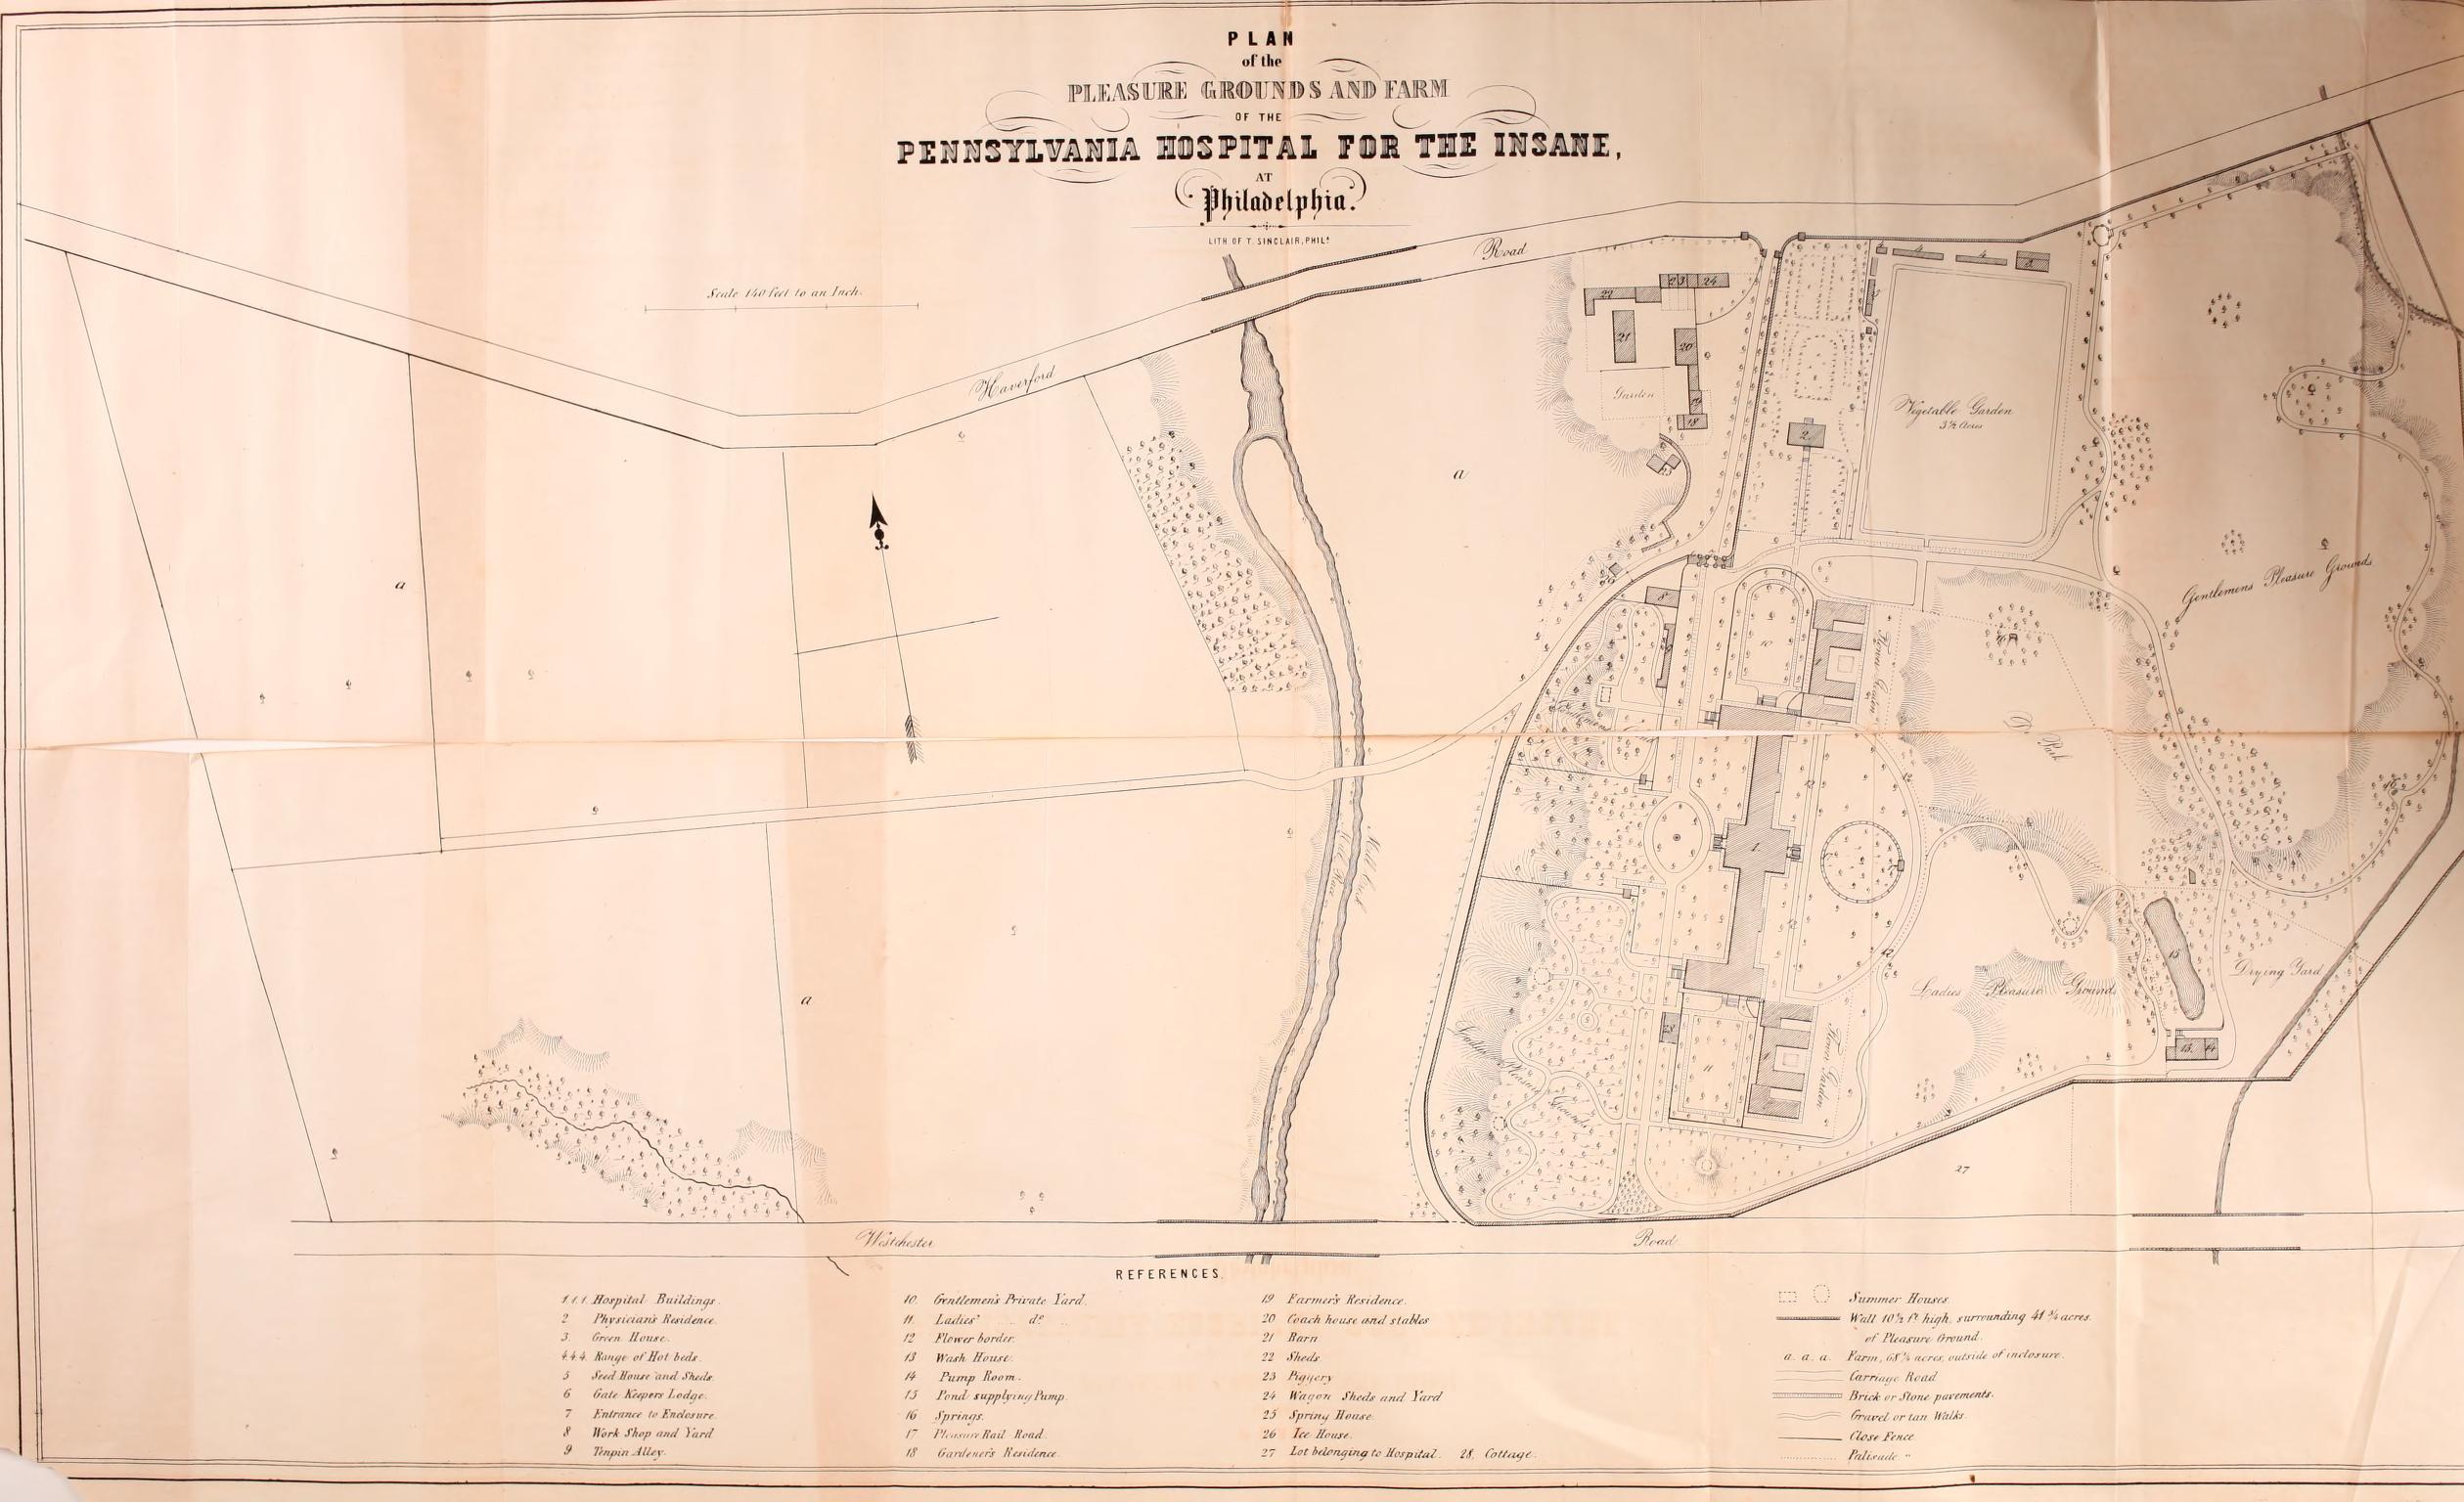 Fig. 12, Thomas S. Sinclair, "Plan of the Pleasure Grounds and Farm of the Pennsylvania Hospital for the Insane at Philadelphia," in Thomas S. Kirkbride, American Journal of Insanity 4 (April 1848): n.p.